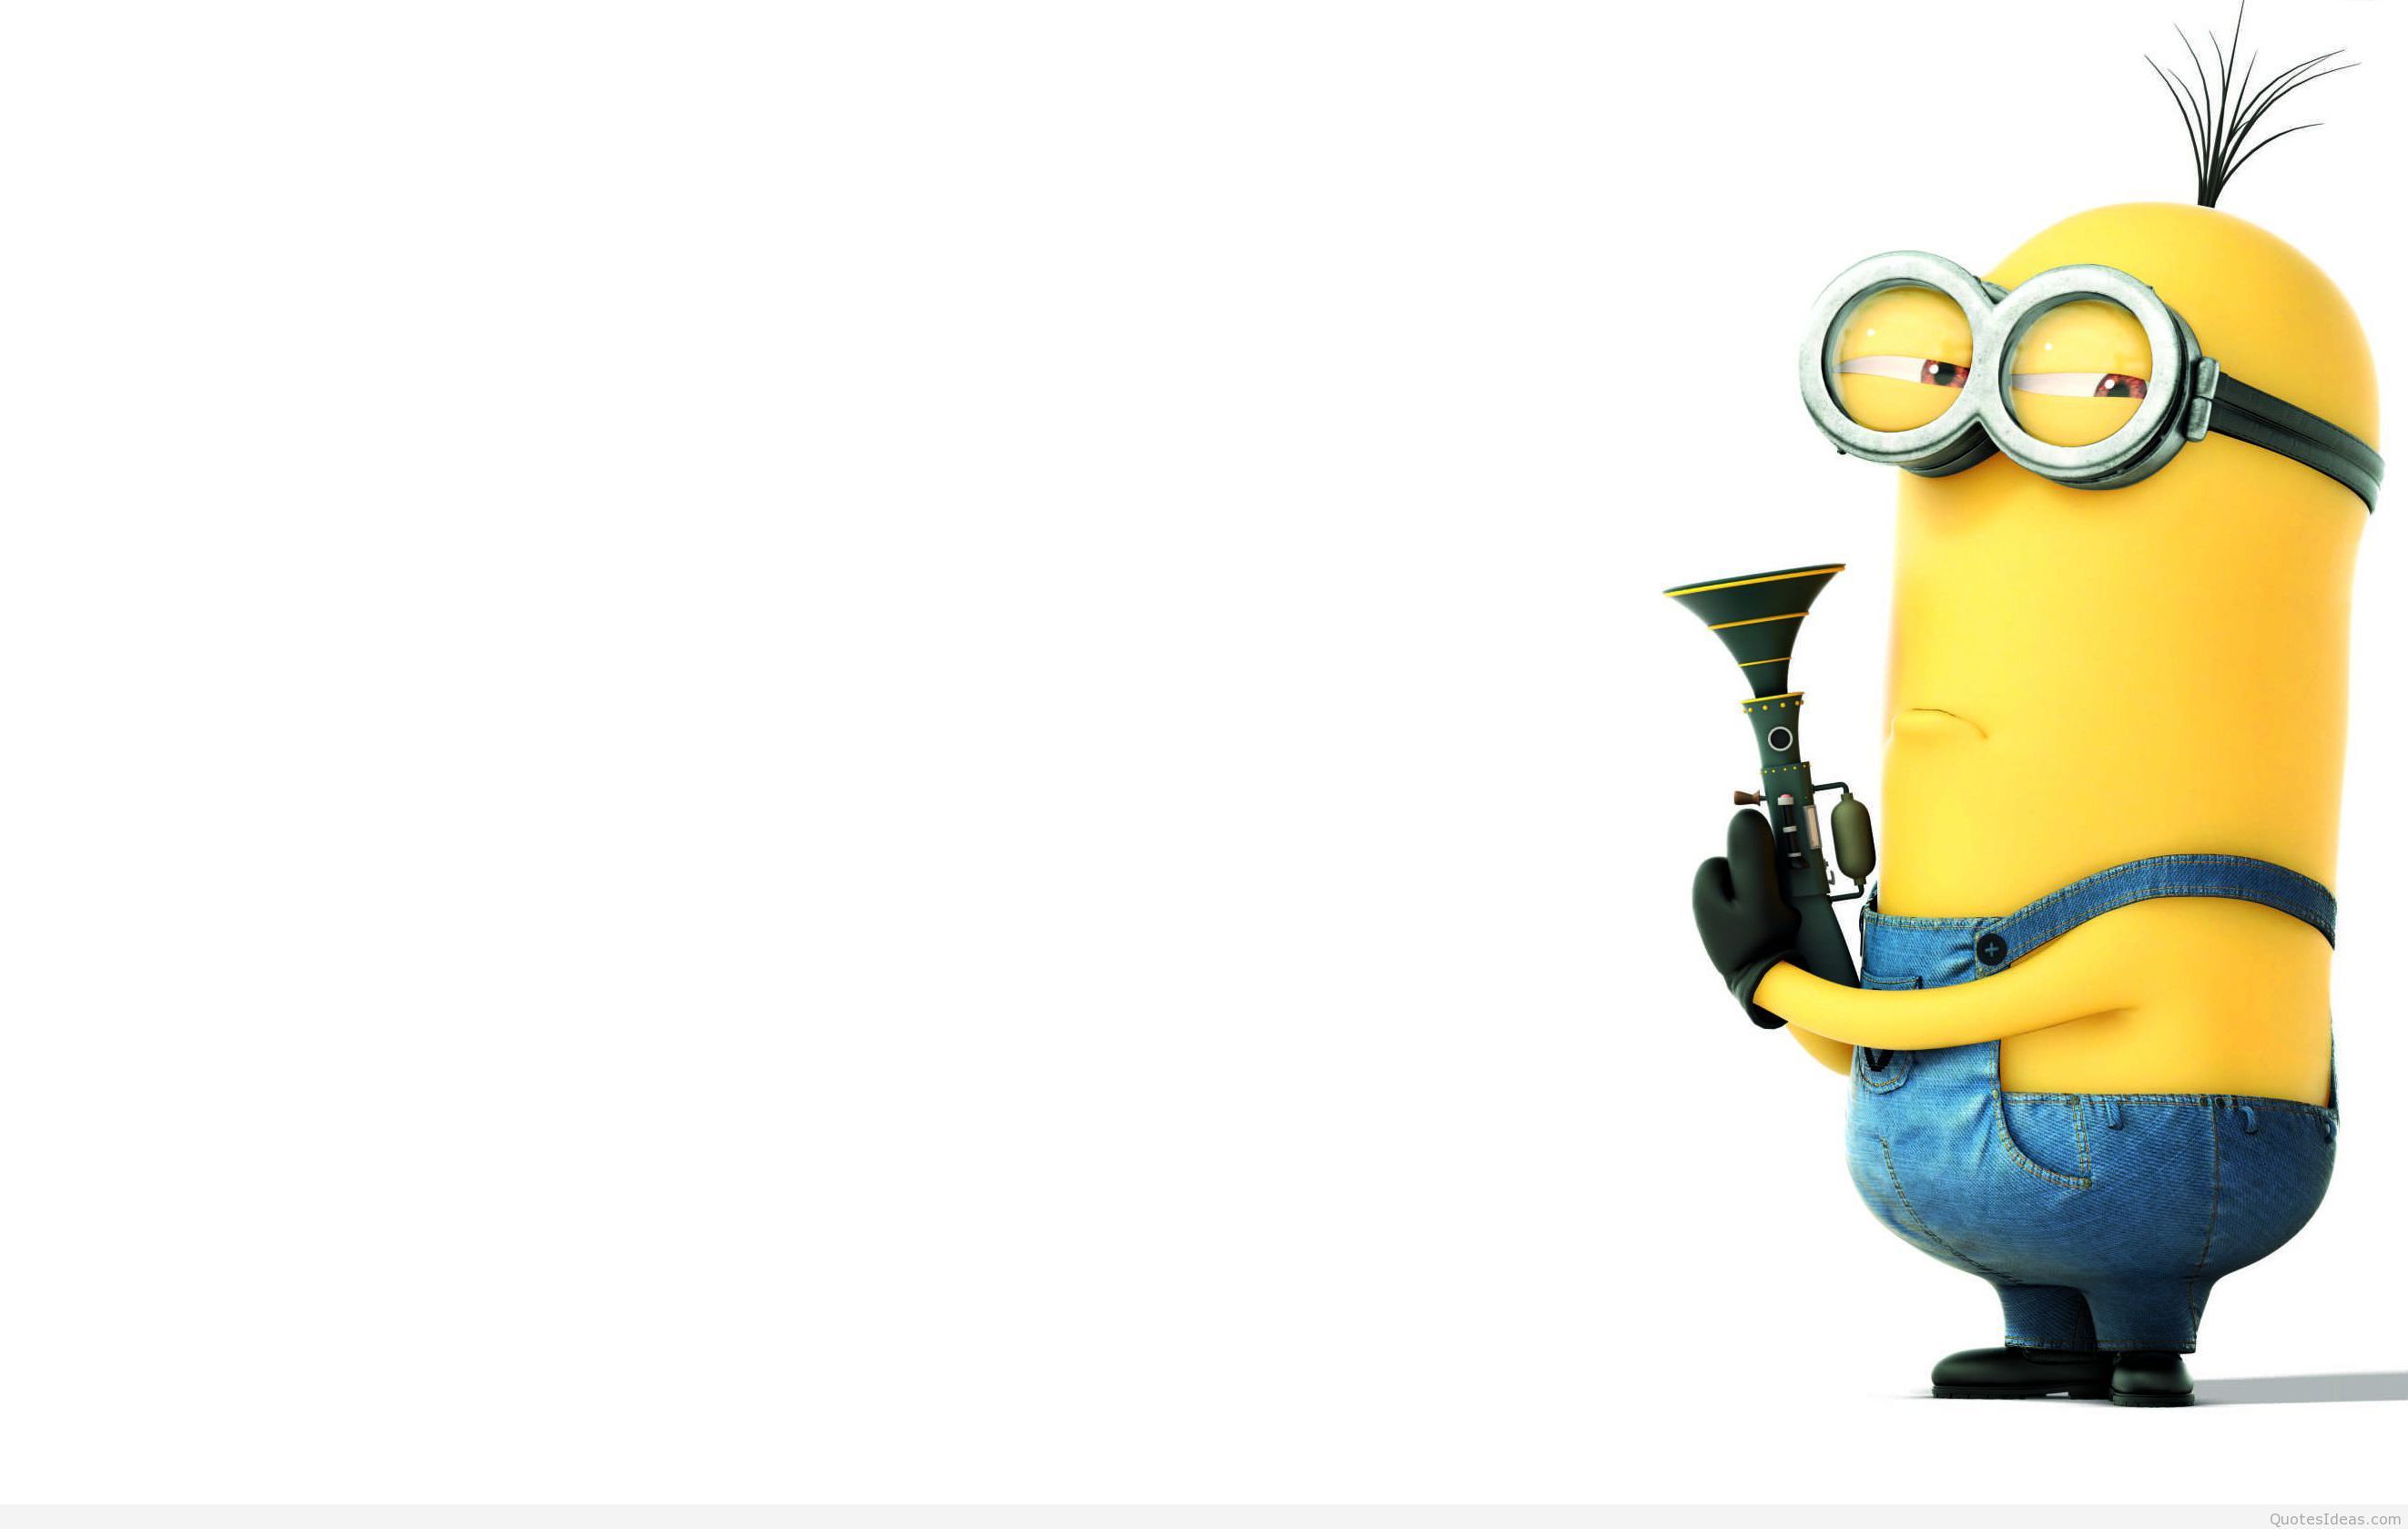 Funny mobile wallpapers with minions 2015 2016